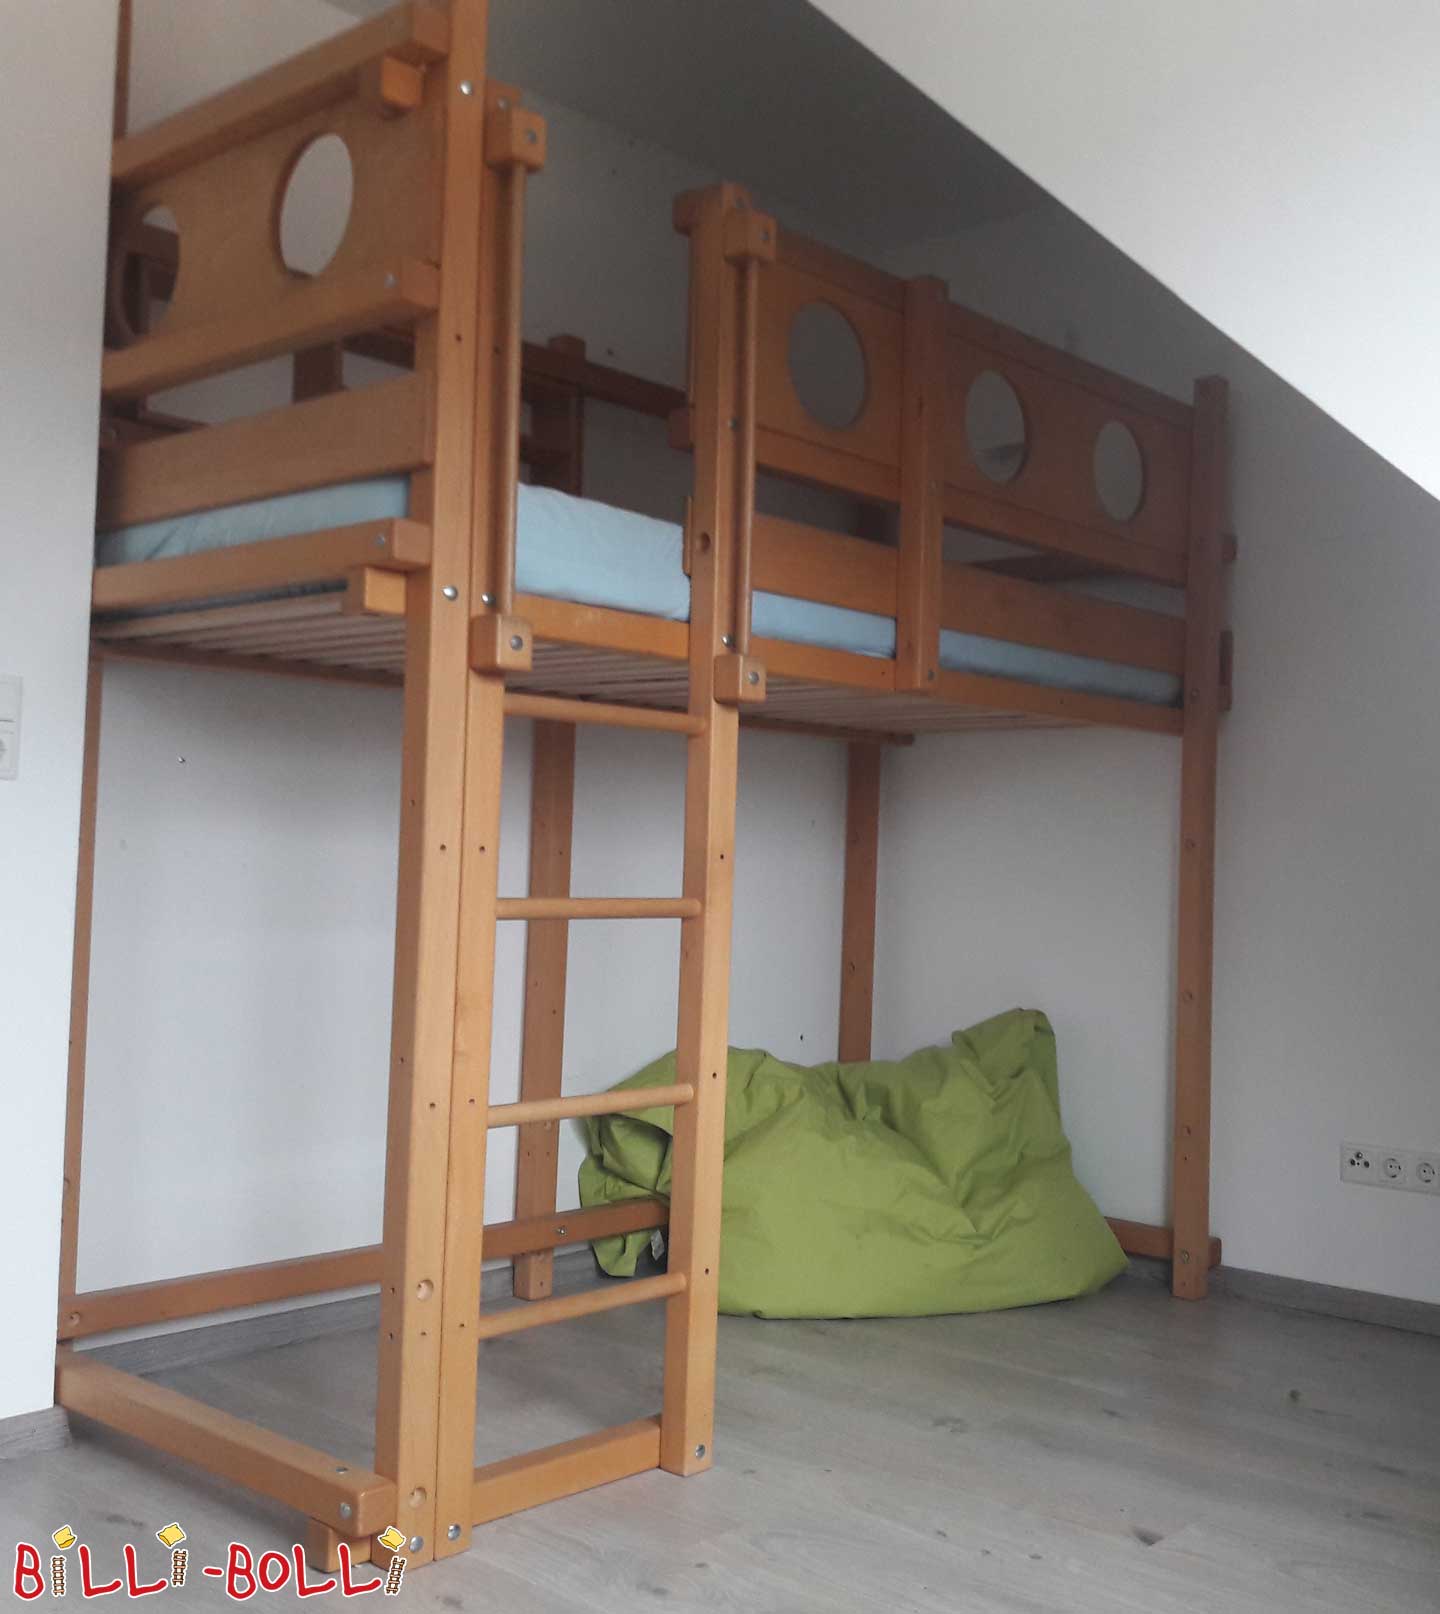 Adventure bed grows with the child (Category: second hand loft bed)